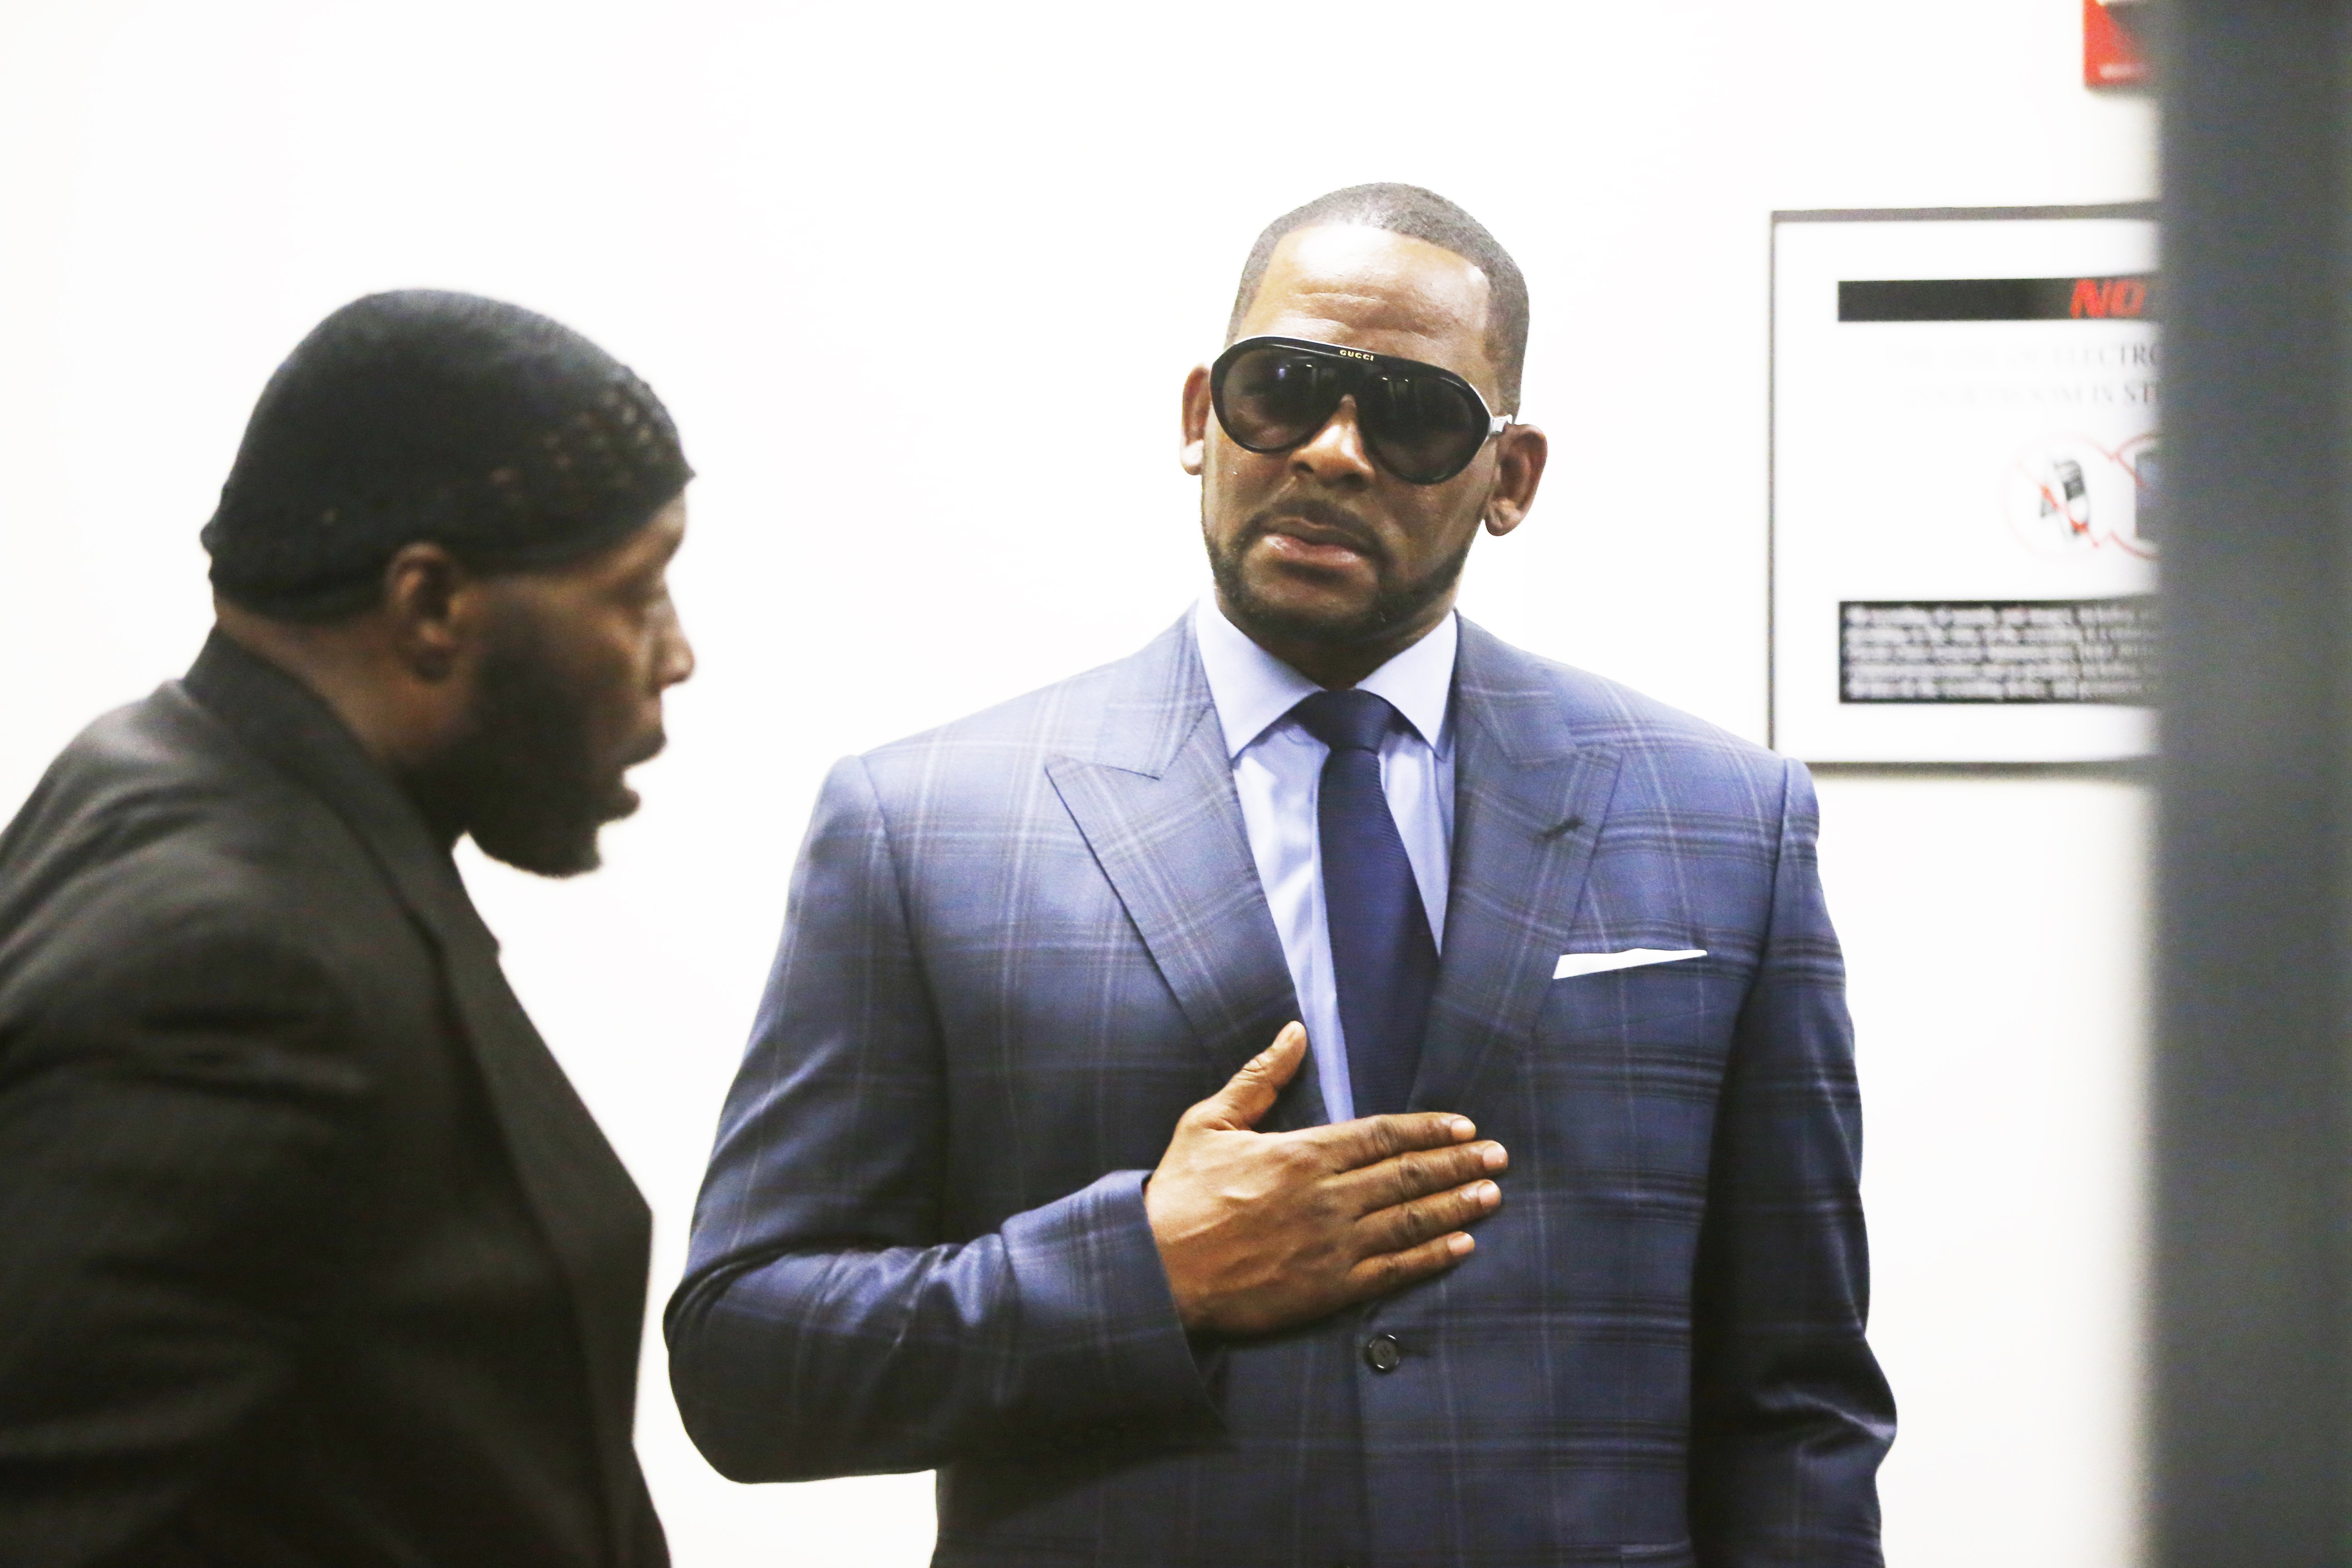 R. Kelly appears in family court over unpaid child support on March 9, 2019. | Photo: Getty Images